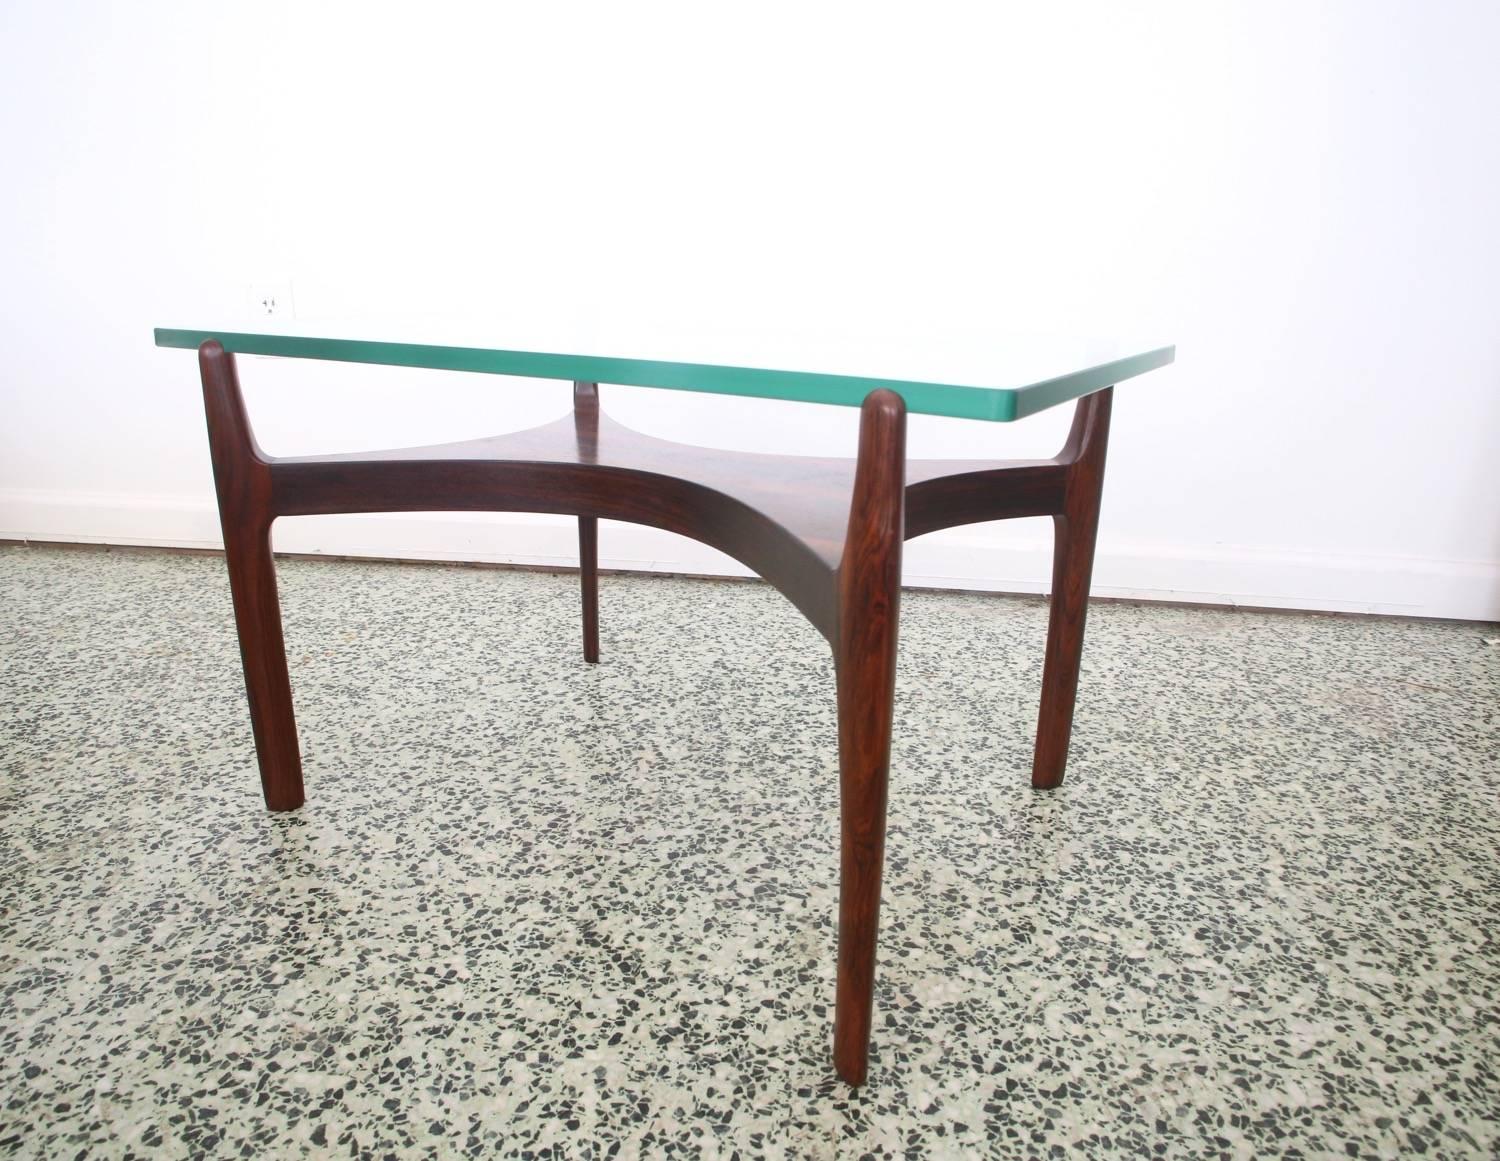 Rare Danish teak and glass coffee table by Sven Ellekaer, circa 1960. The original smooth rimmed glass top sits on notched teak wood leg posts.